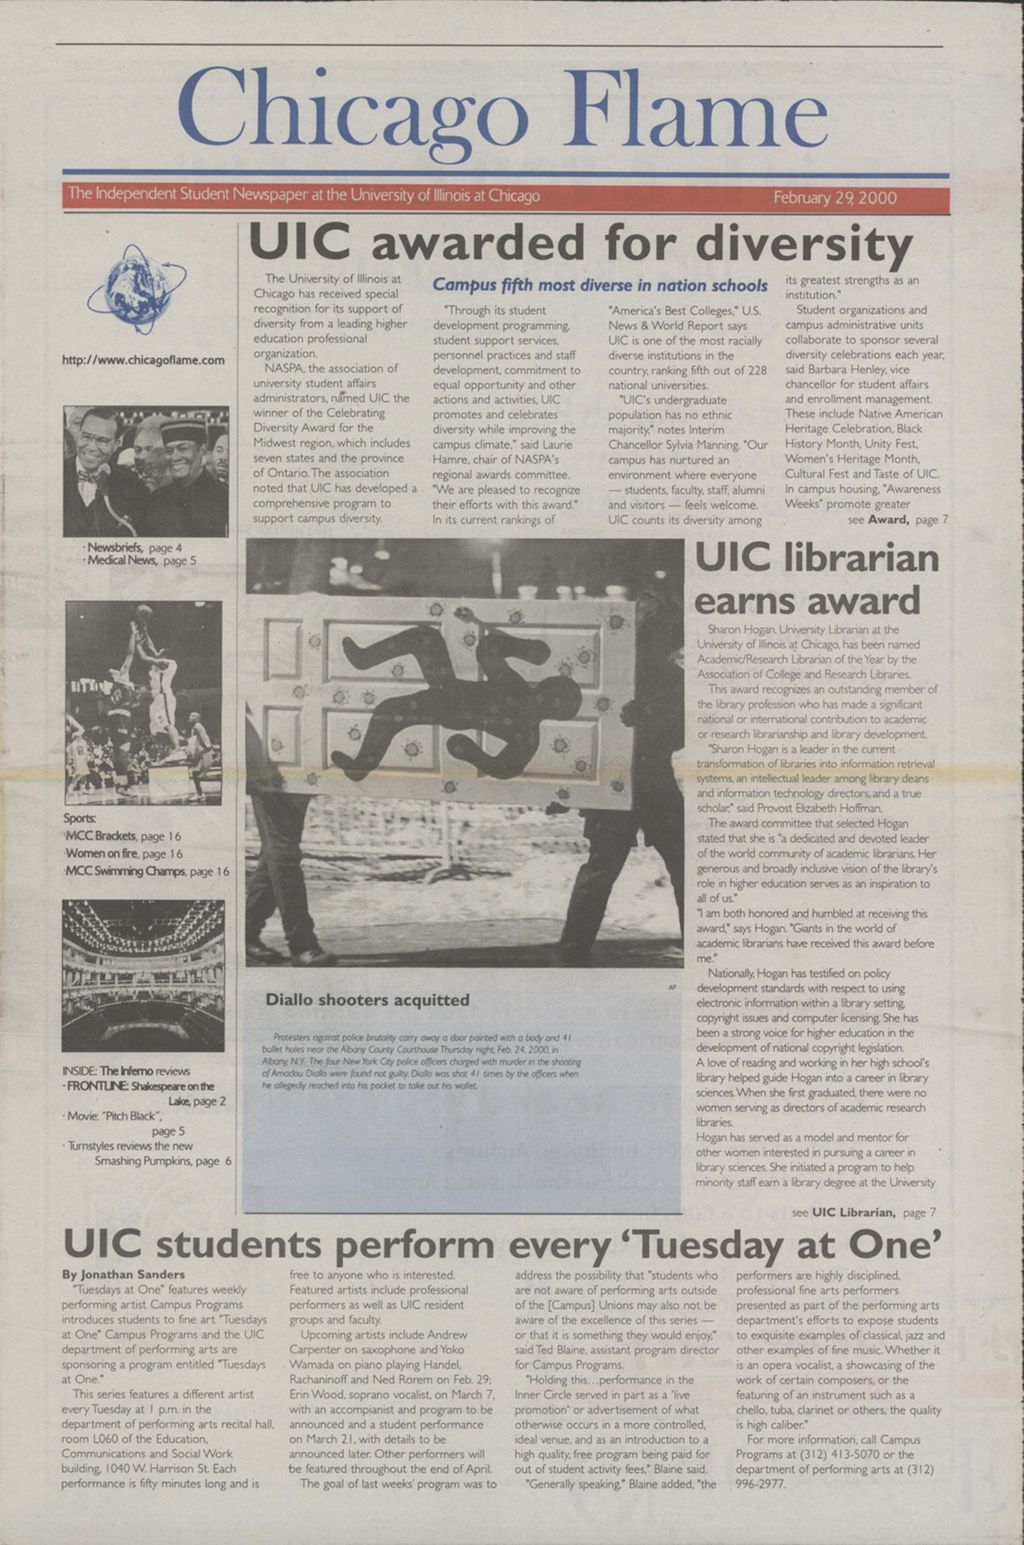 Miniature of Chicago Flame (February 29, 2000)